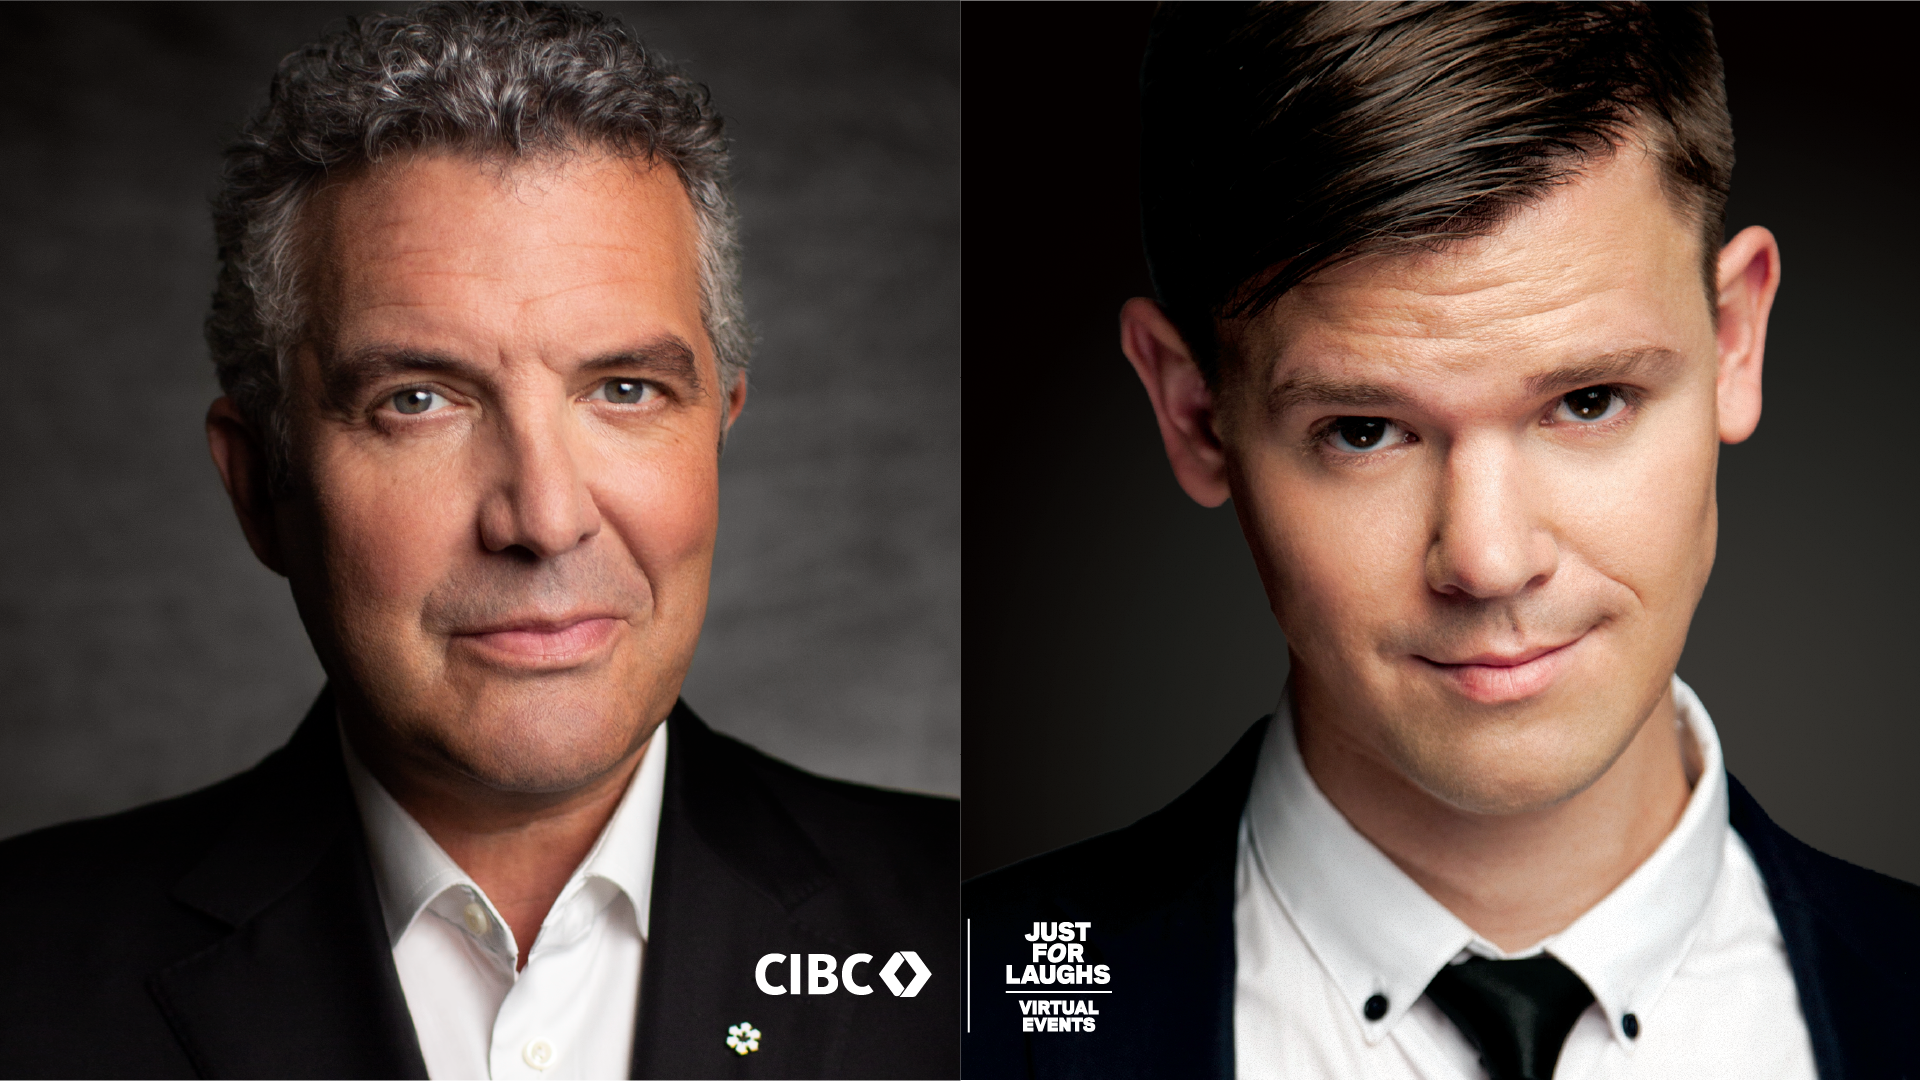 CIBC presents - Just For Laughs – A Comedy Evening with Rick Mercer and Ivan Decker